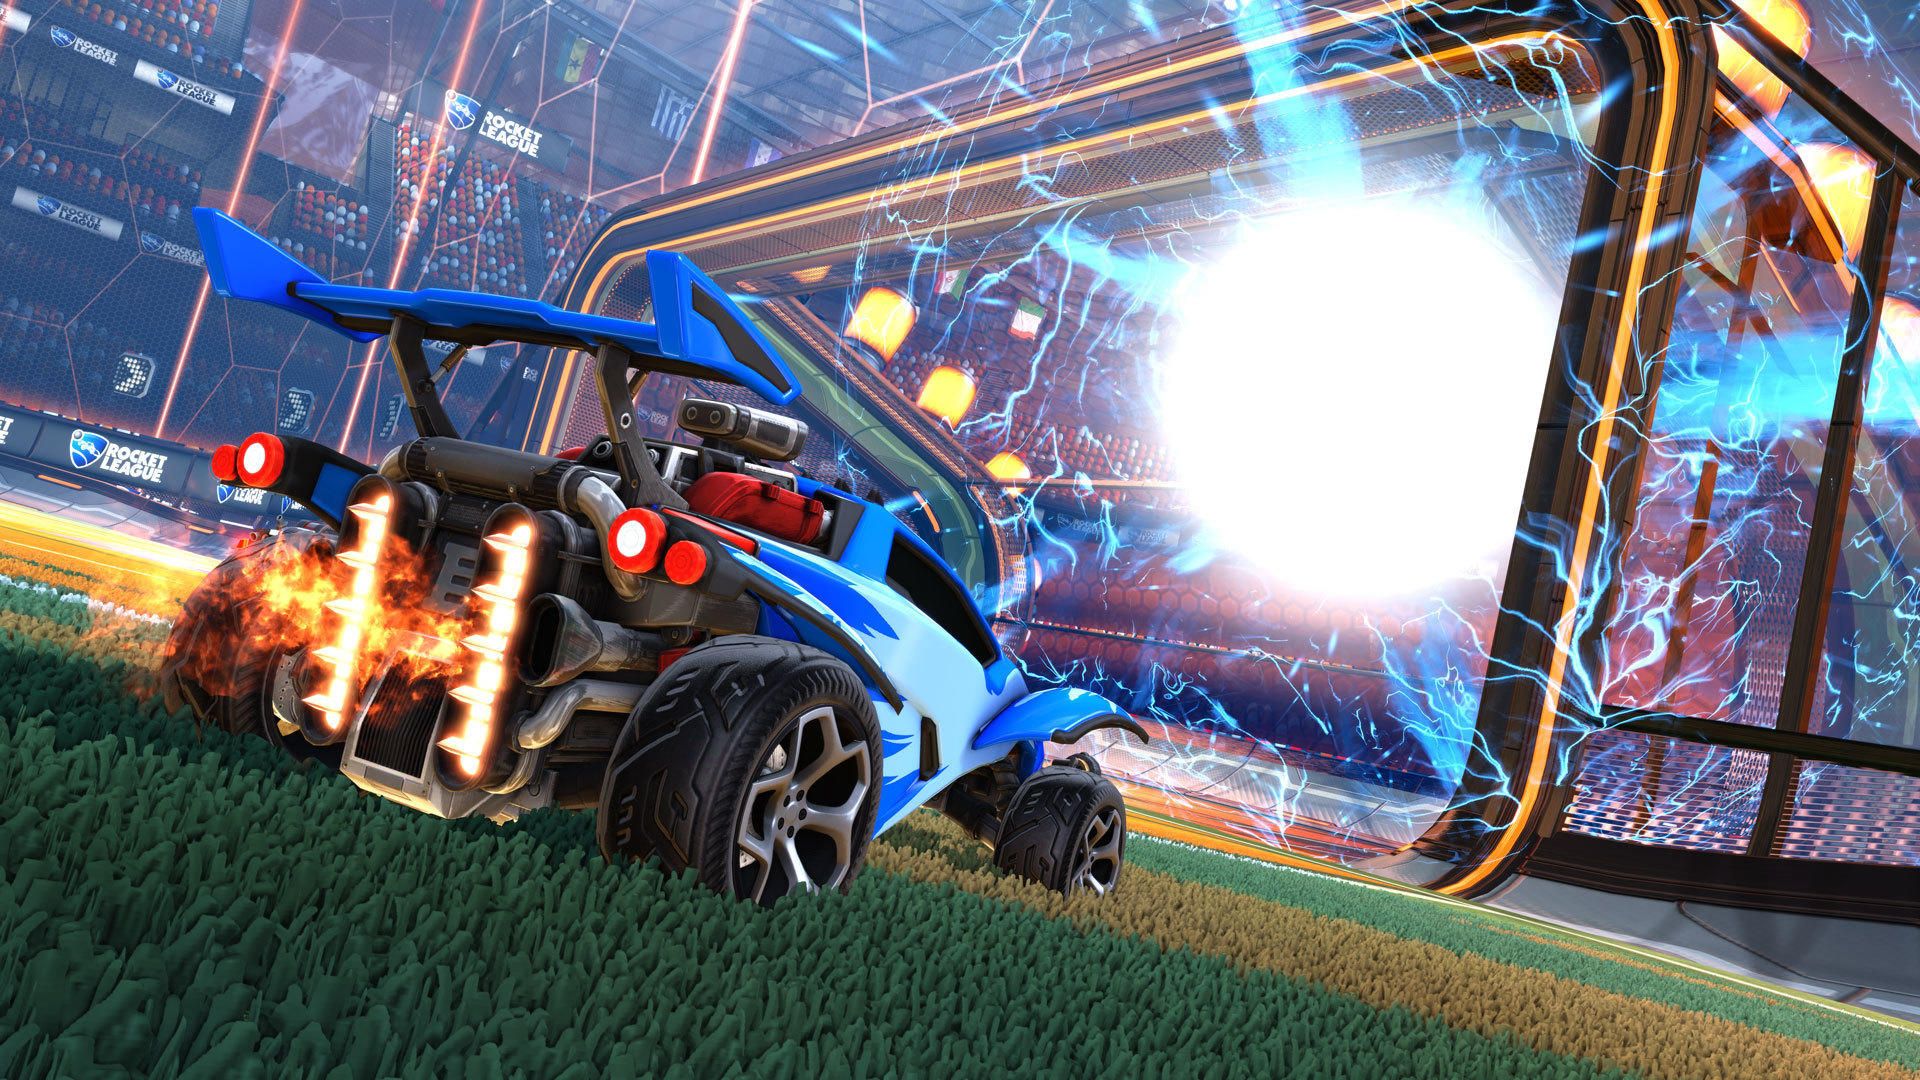 Rocketeers Rocket League is the perfect esports game